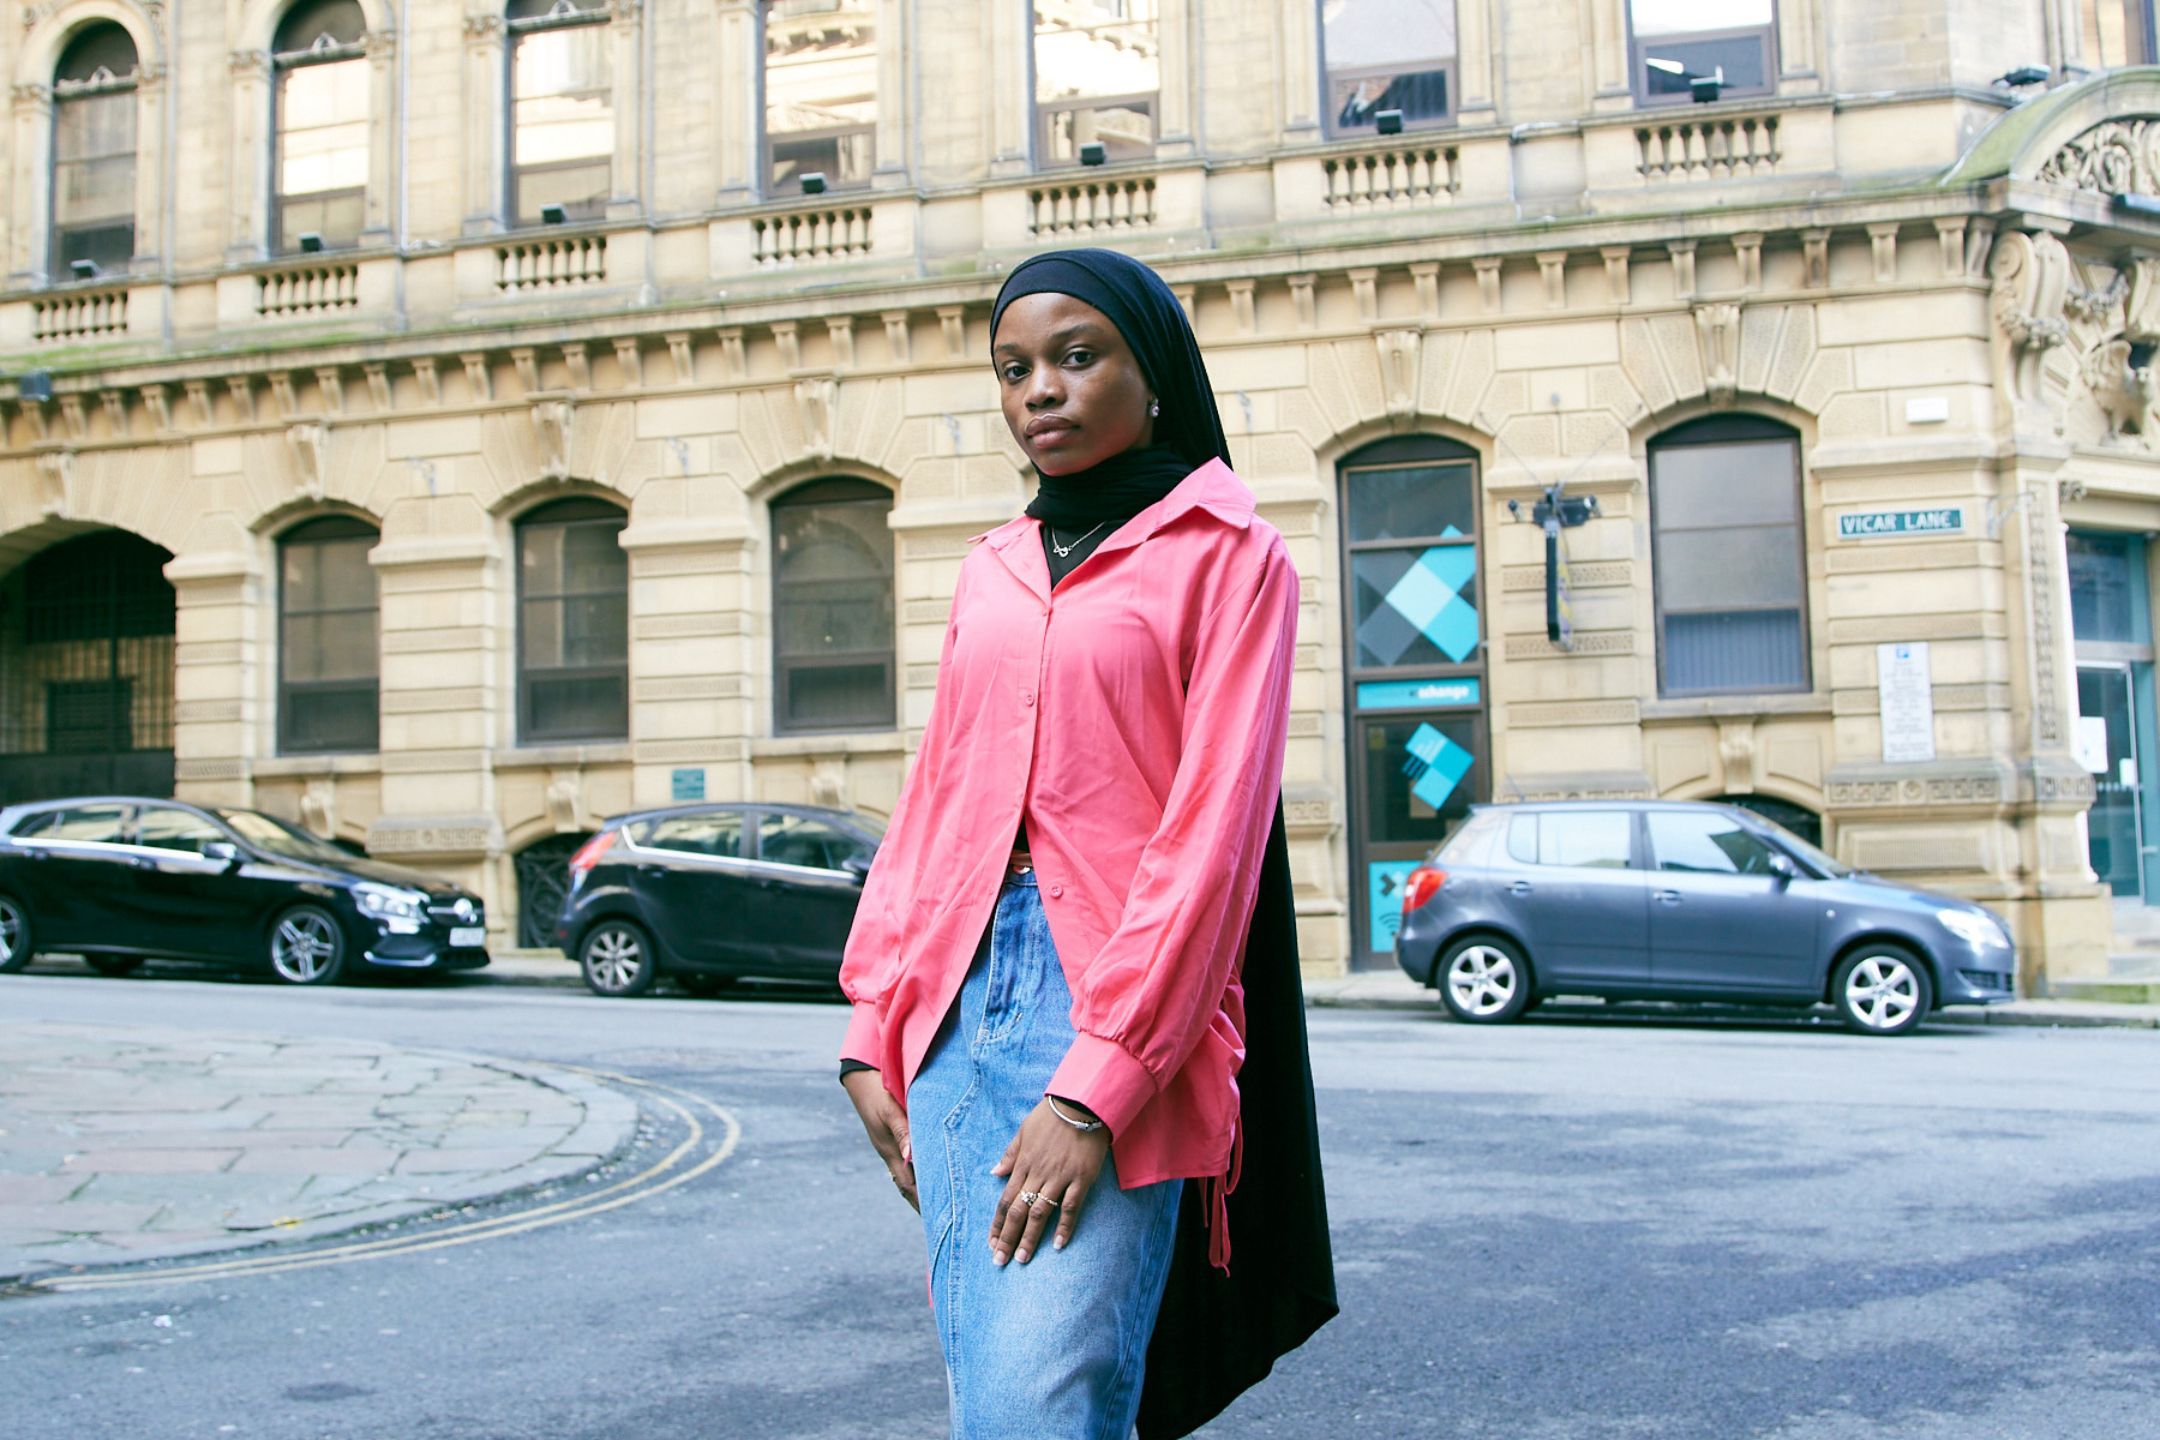 A portrait of a member of the Bradford 2025 youth panel. She wears a black headscarf and pink shirt.